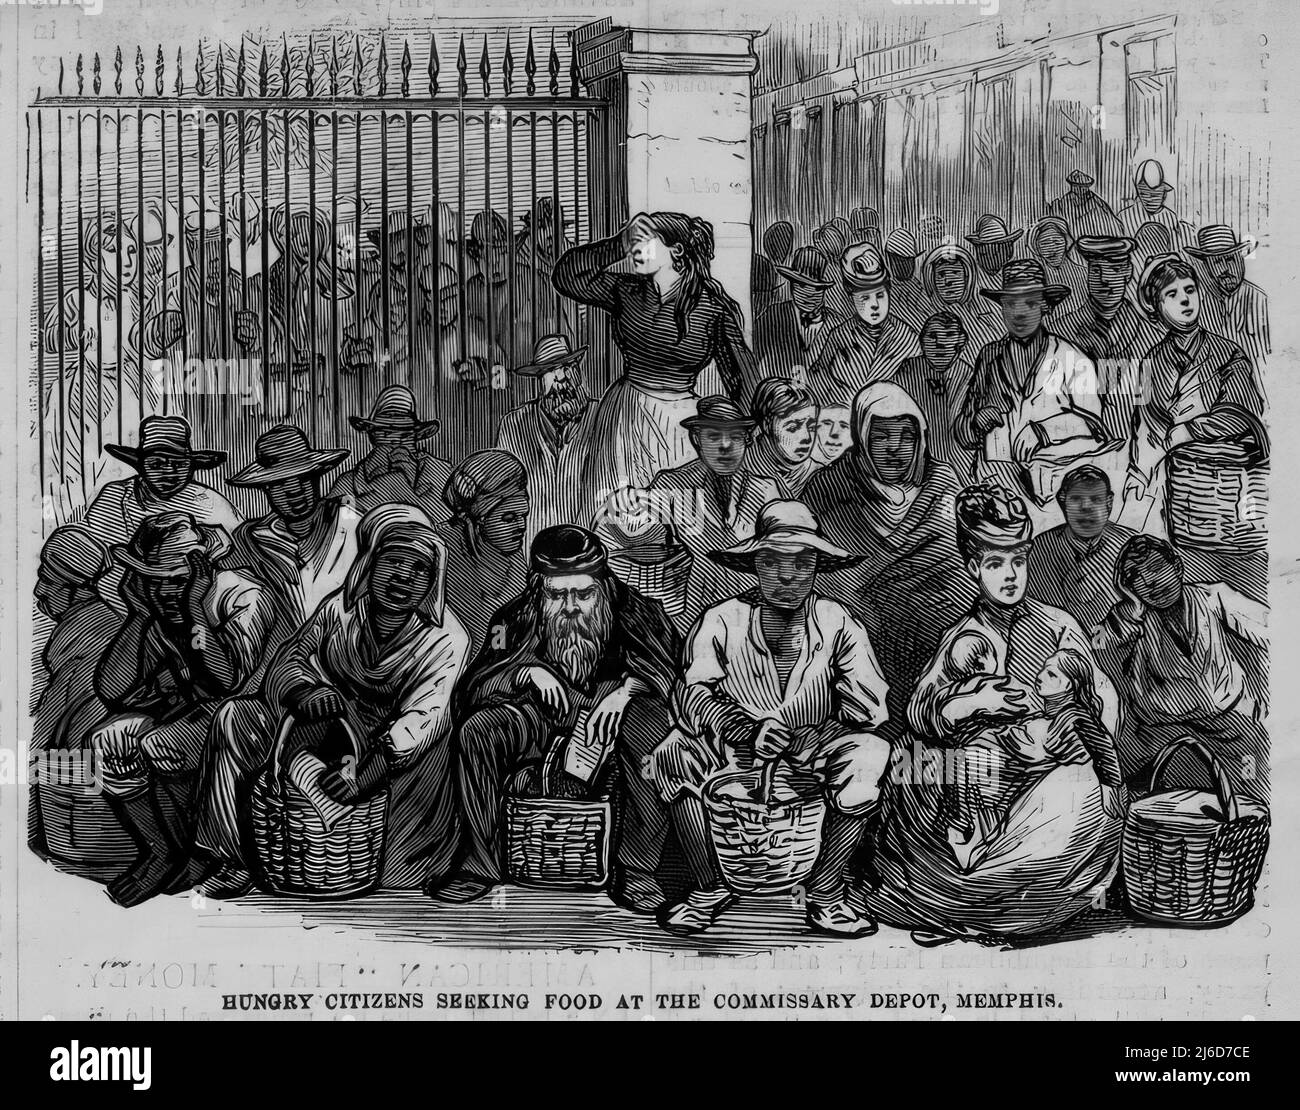 Hungry Citizens Seeking Food at the Commissary Depot, Memphis, Tennessee. 1878 illustration Stock Photo